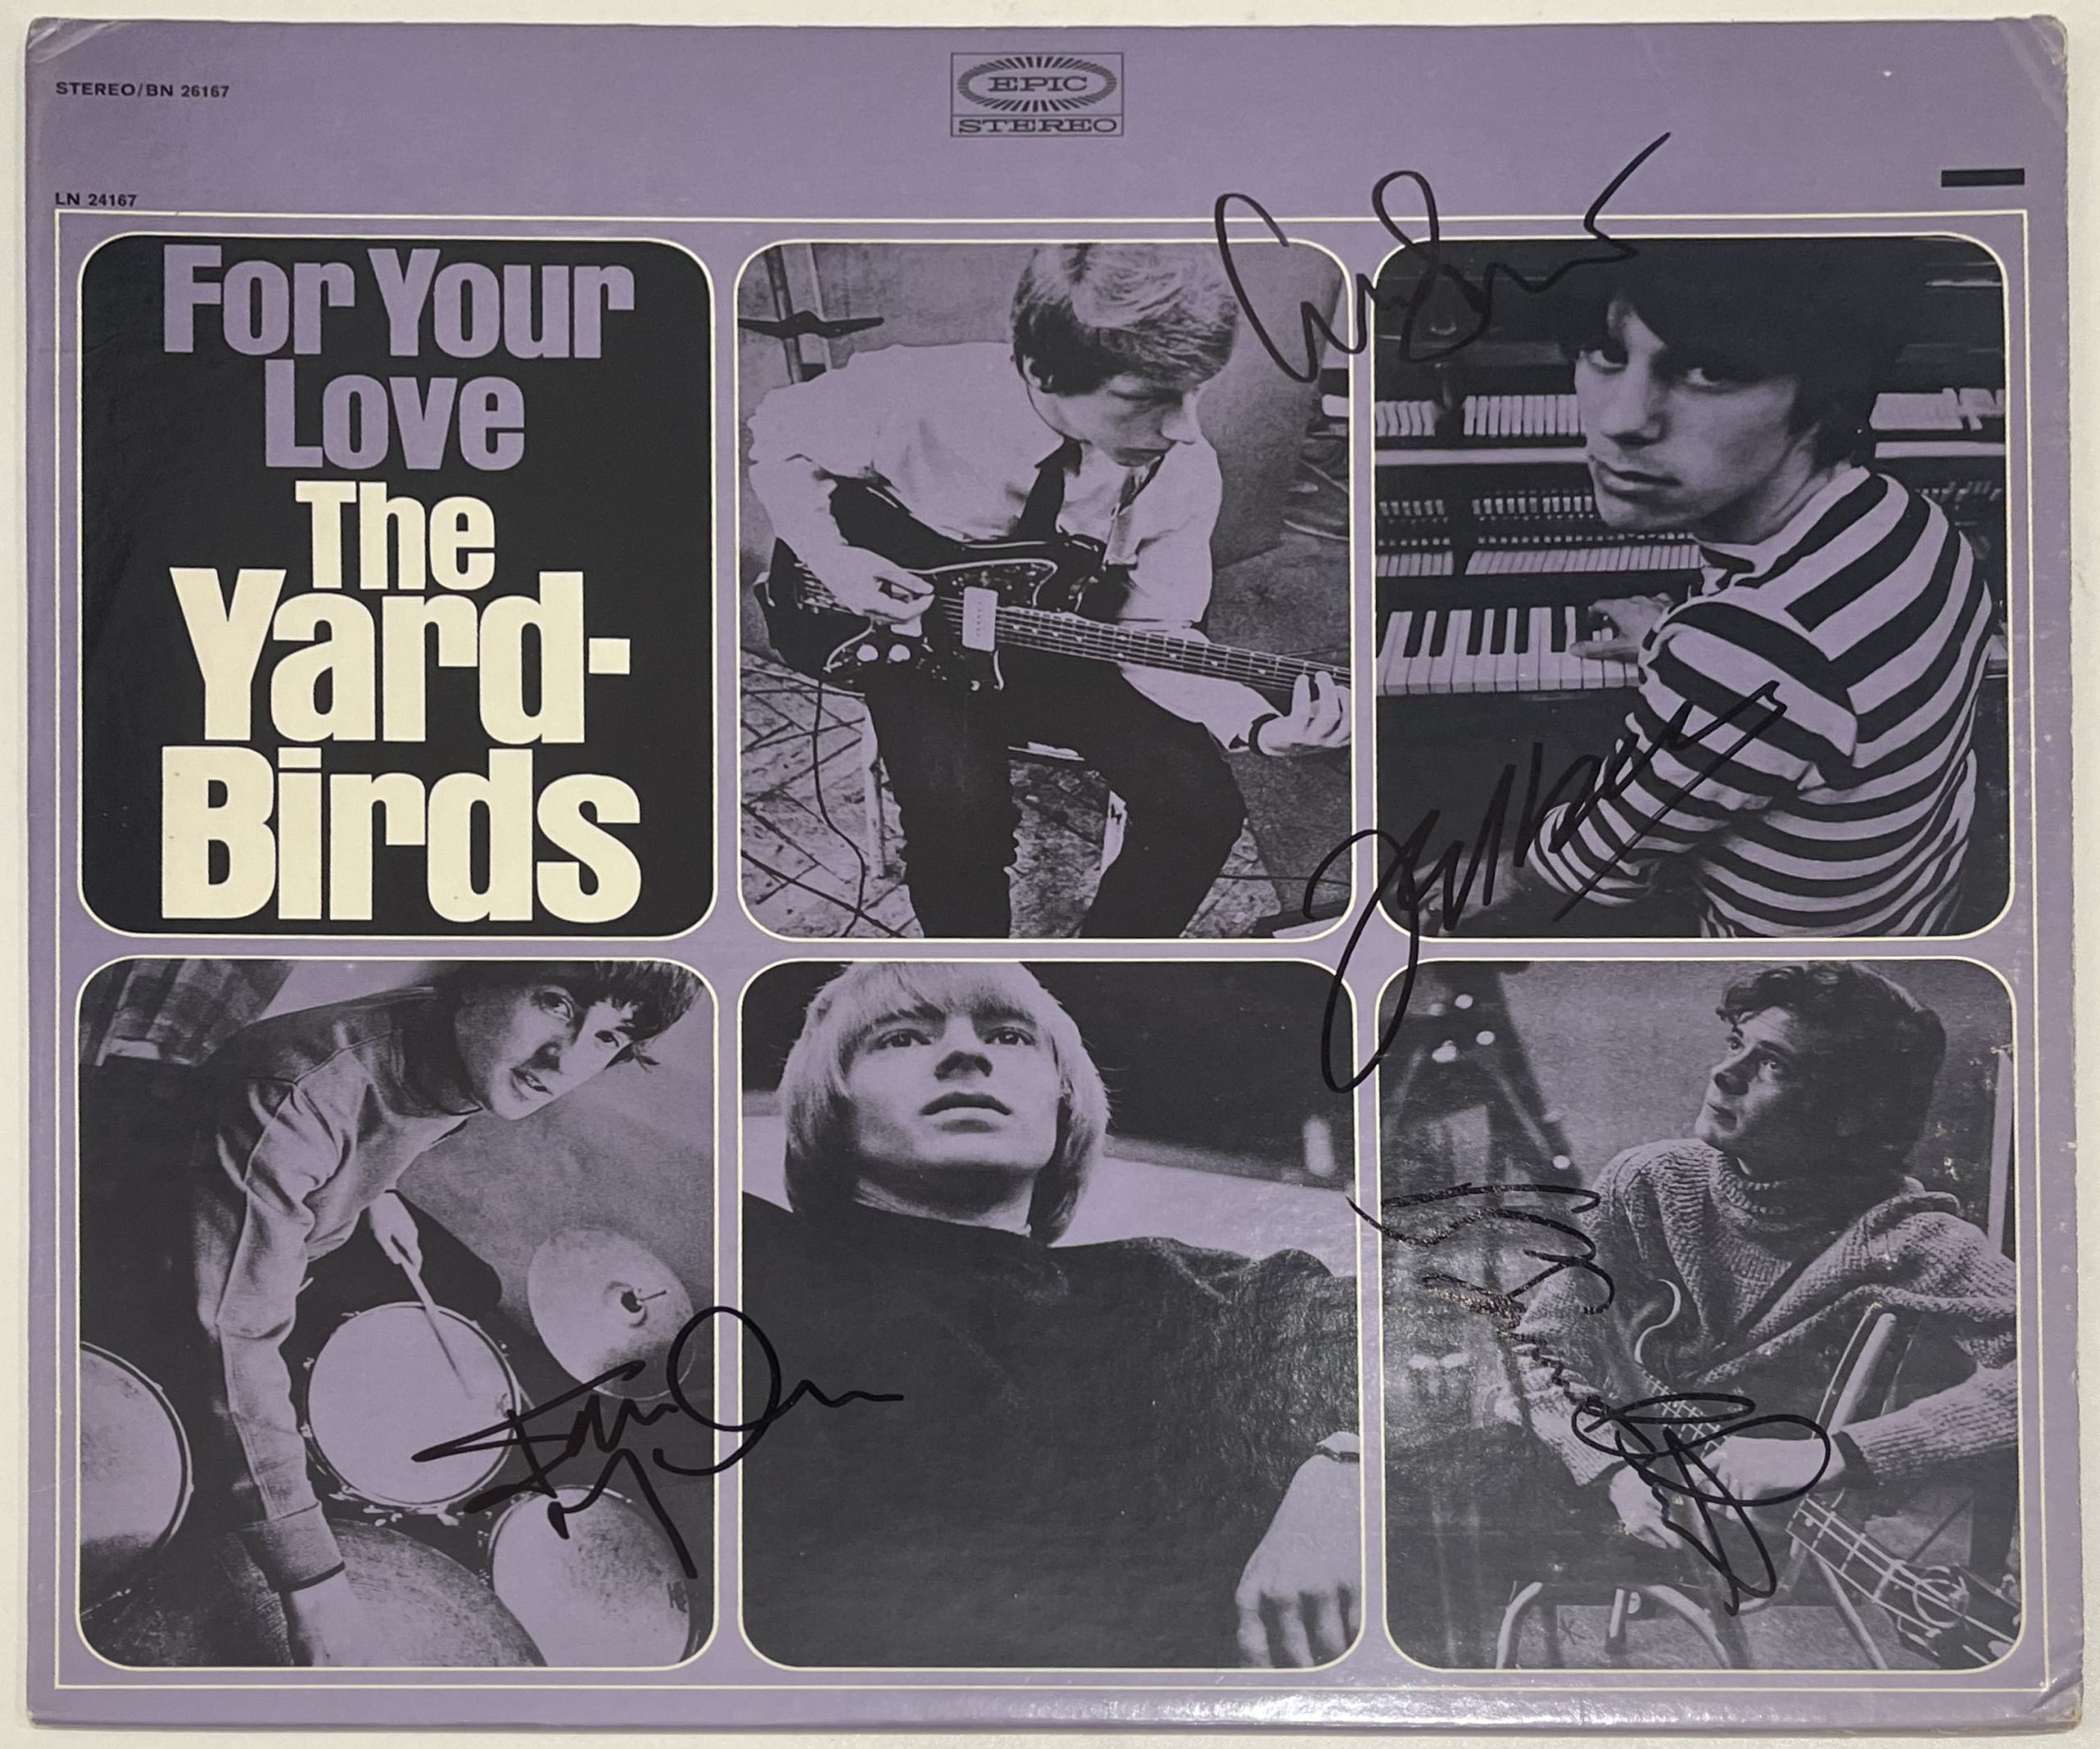 For Your Love Hand Signed Vinyl by The Yardbirds